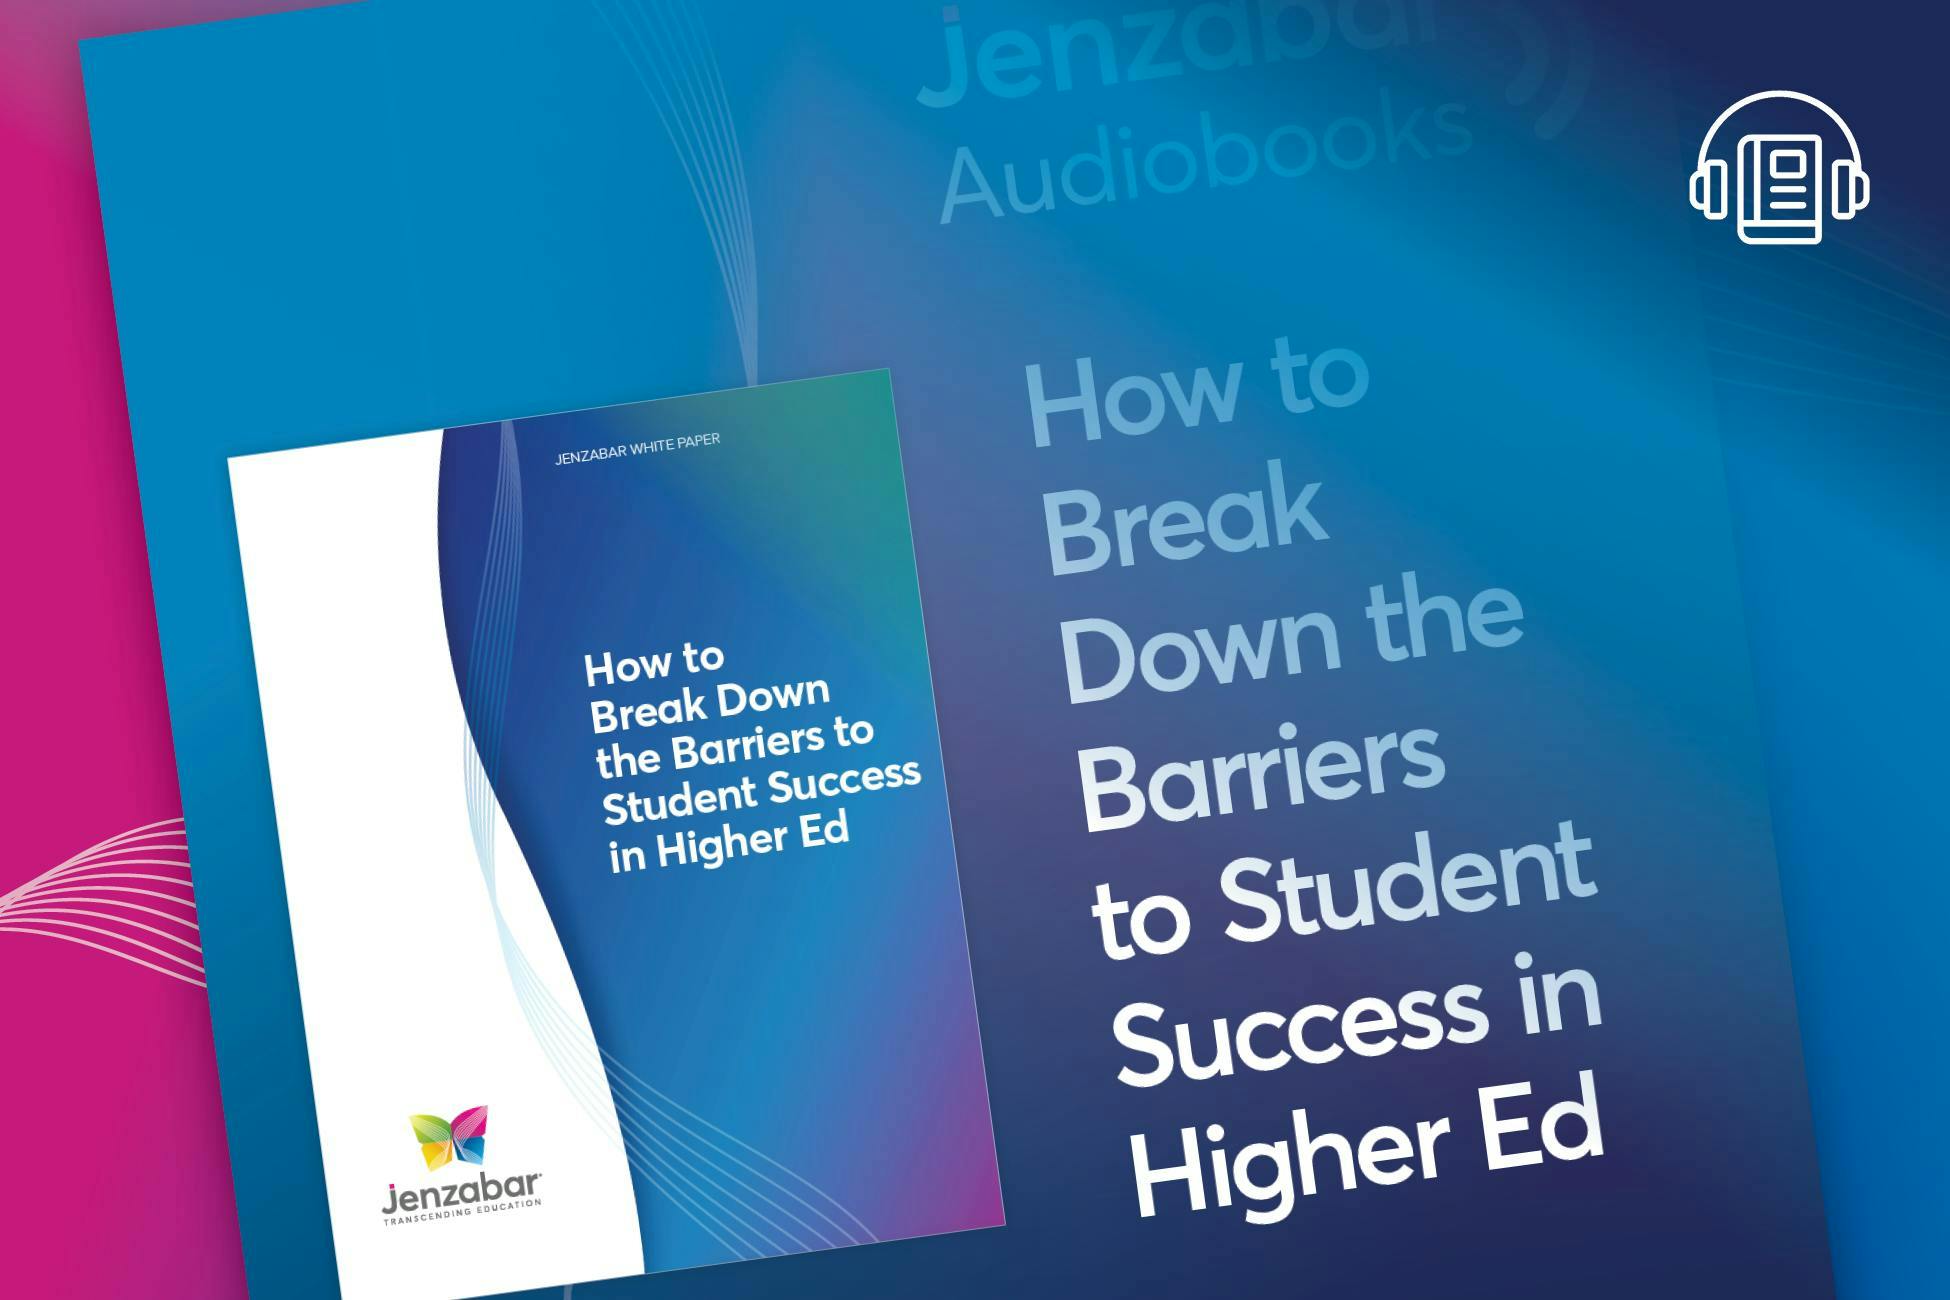 How to Break Down the Barriers to Student Success in Higher Education